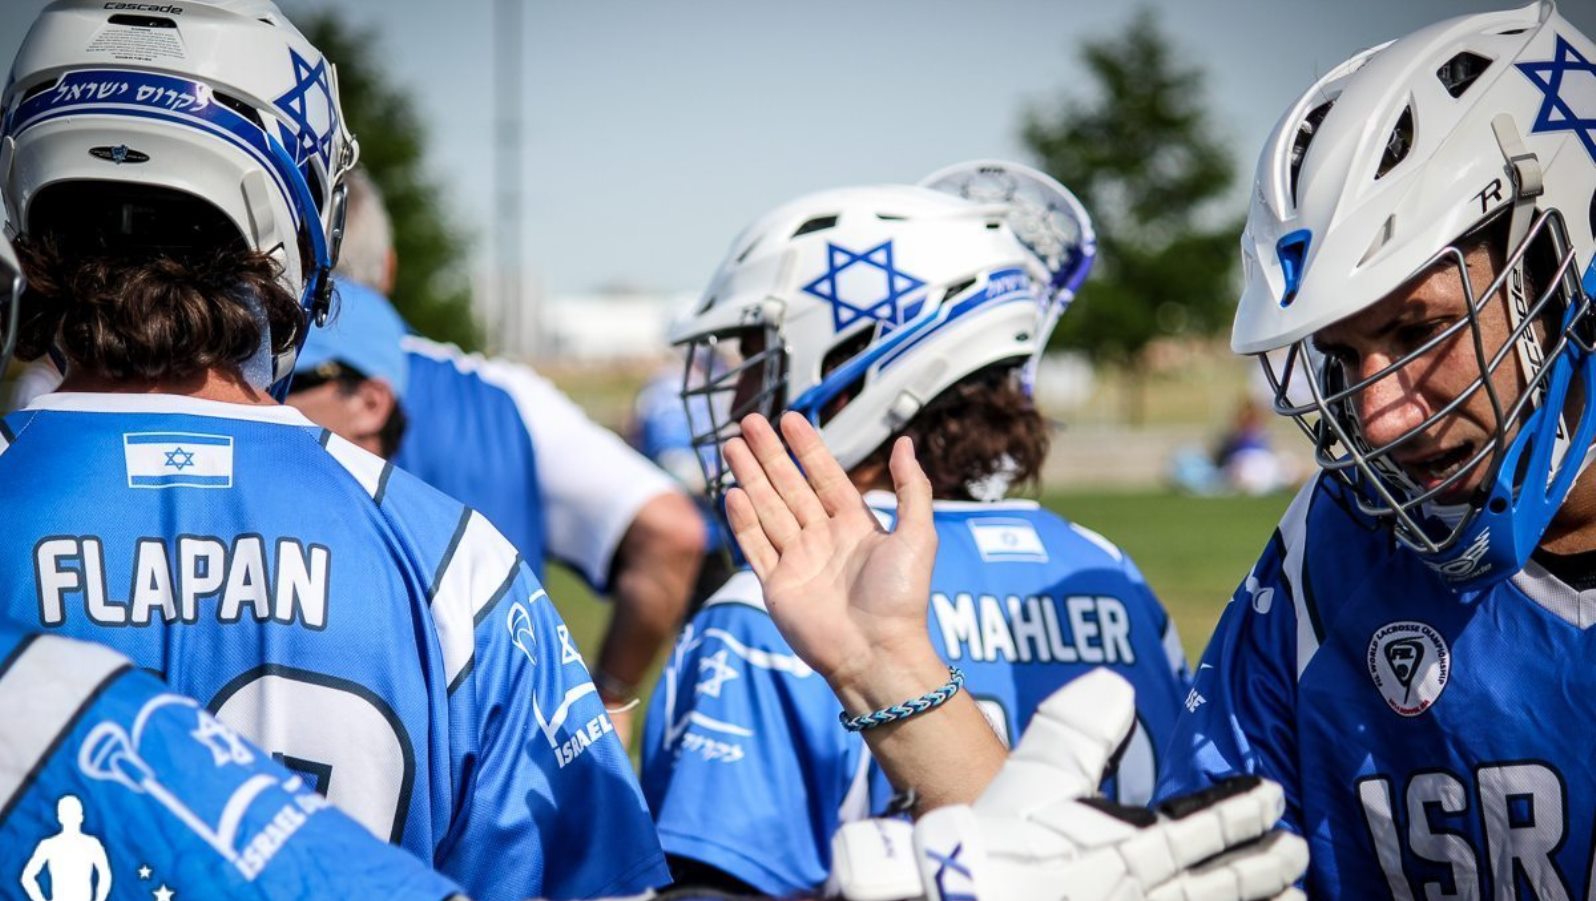 Israeli lacrosse players at the previous world championships in 2014. Photo courtesy of Lacrosse Allstars